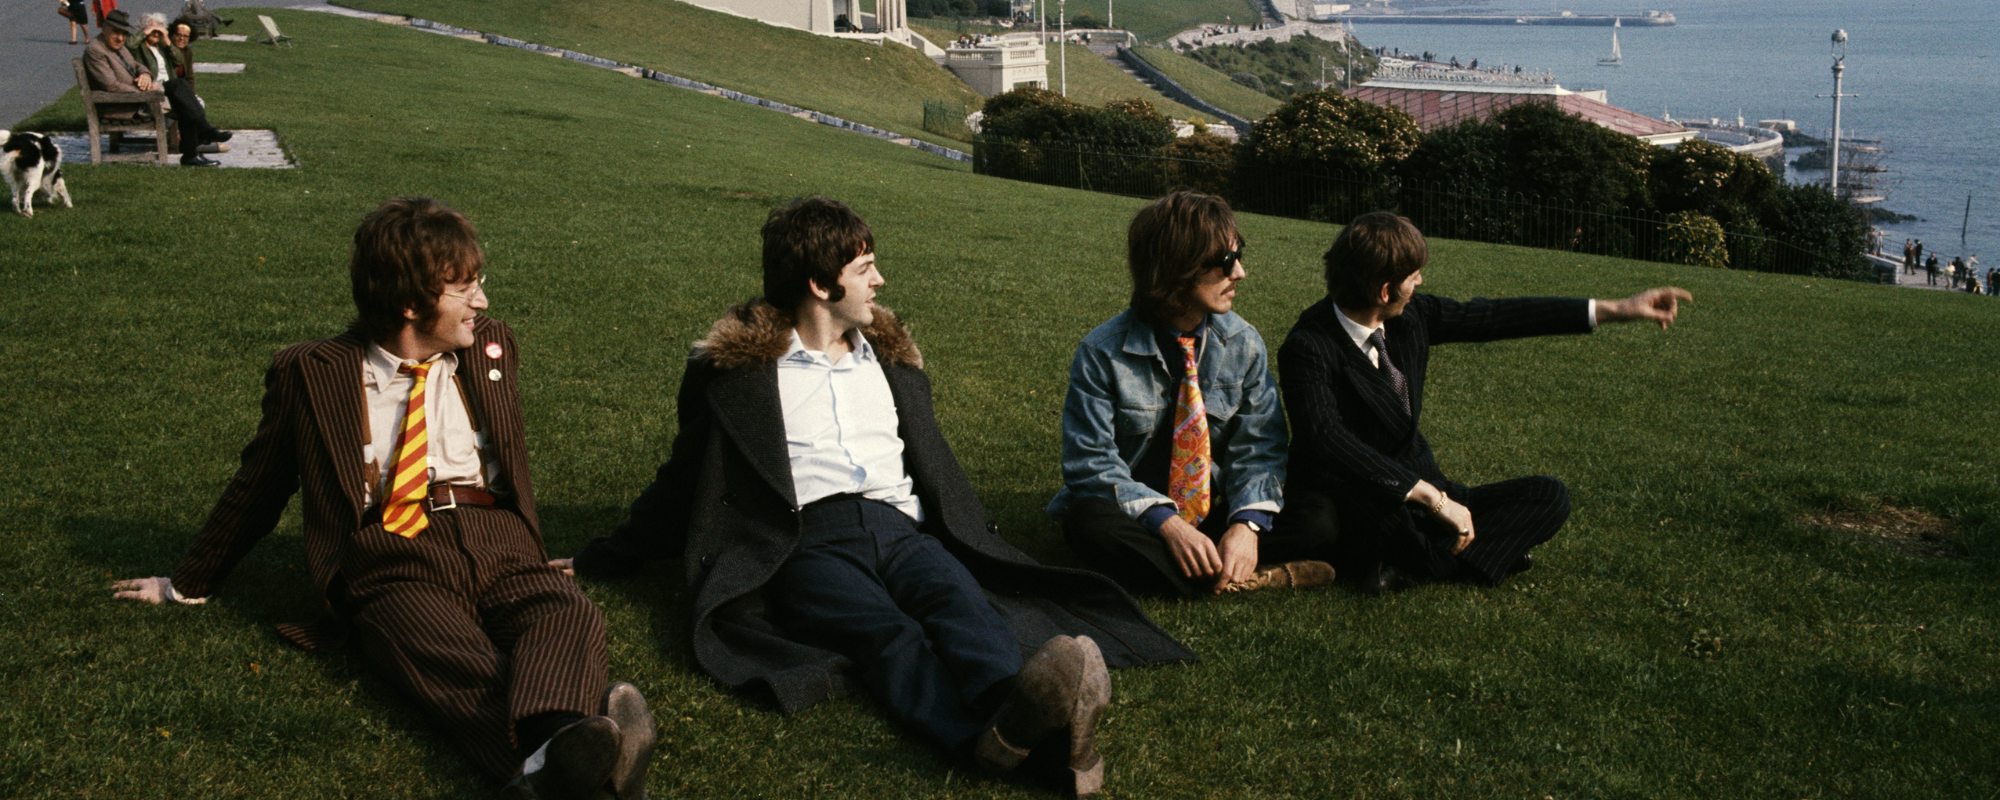 The Meaning Behind The Beatles’ “Runaway” Success with “She’s Leaving Home”